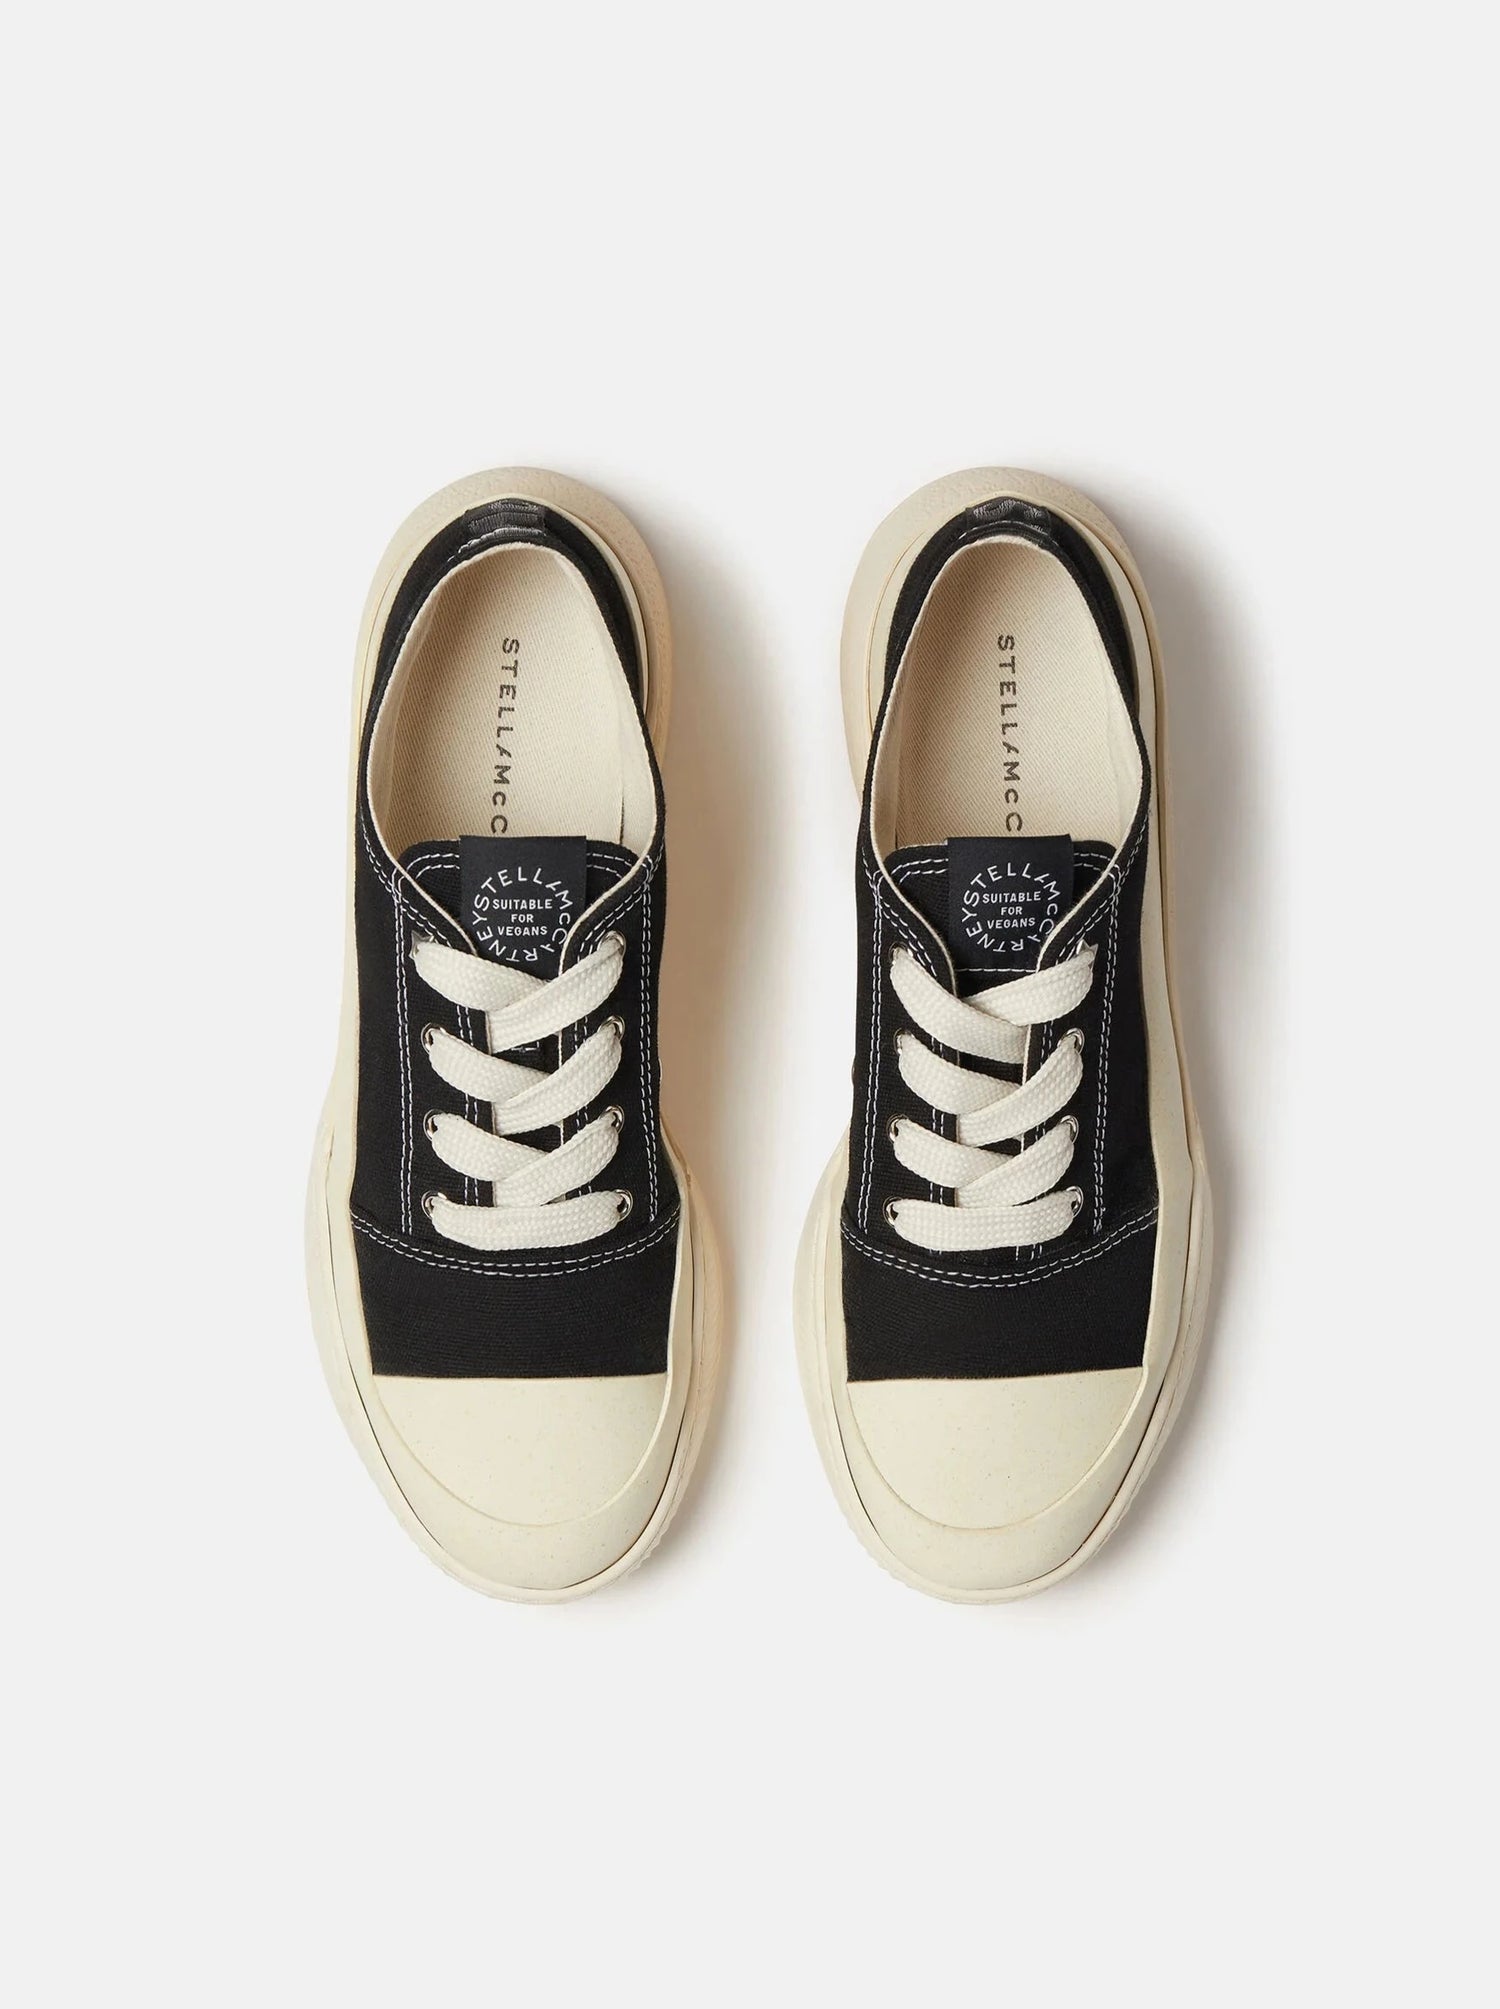 Loop Recycled Cotton sneakers, black/white